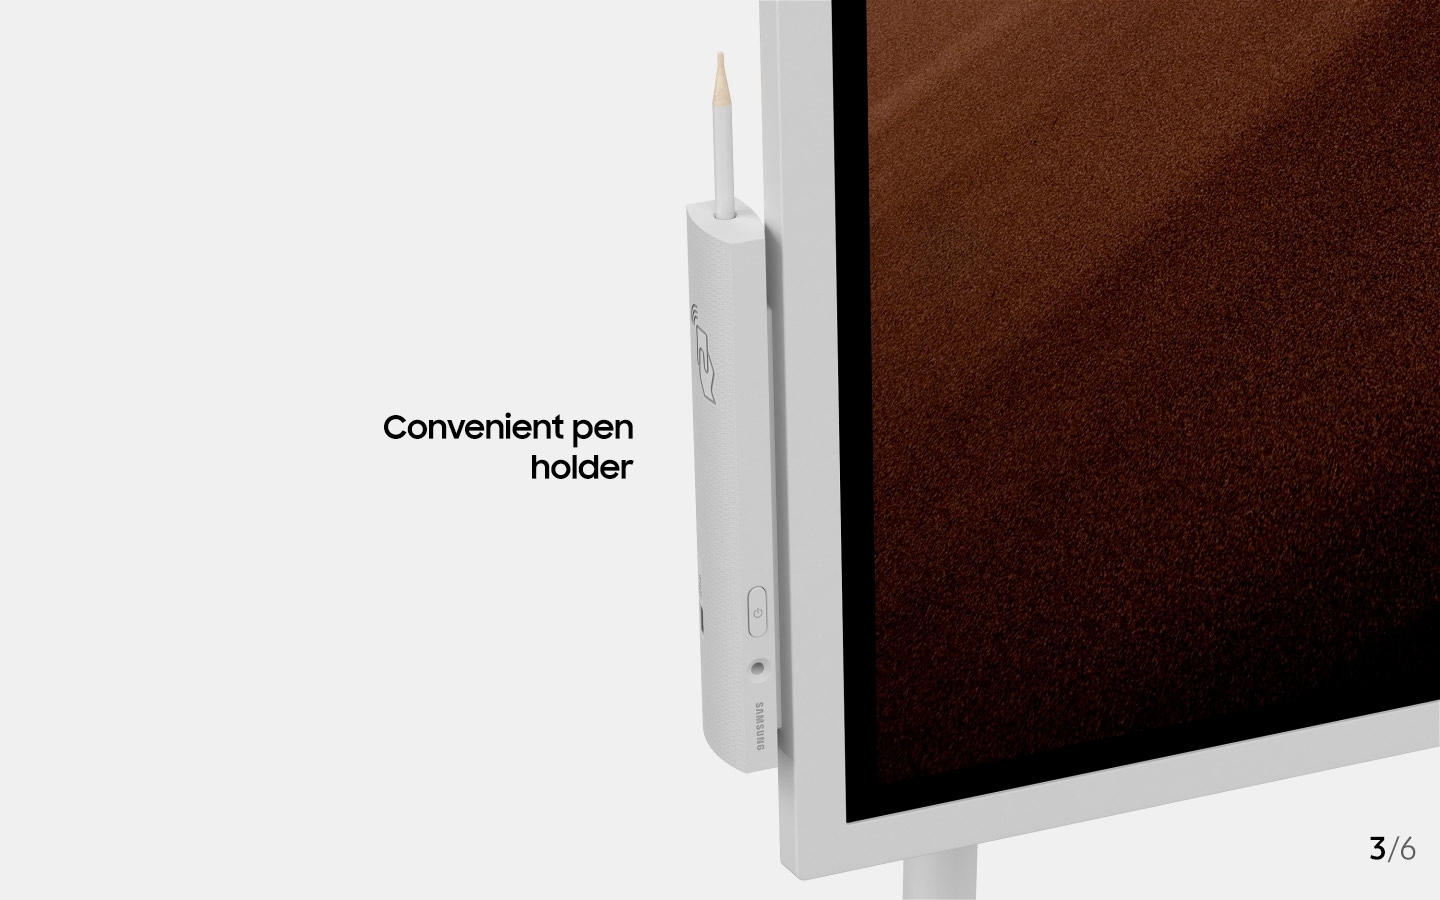 An image showing a magnified image of a Samsung Flip device's pen holder, displaying its NFC tag with text that reads "convenient pen holder"(6-3).